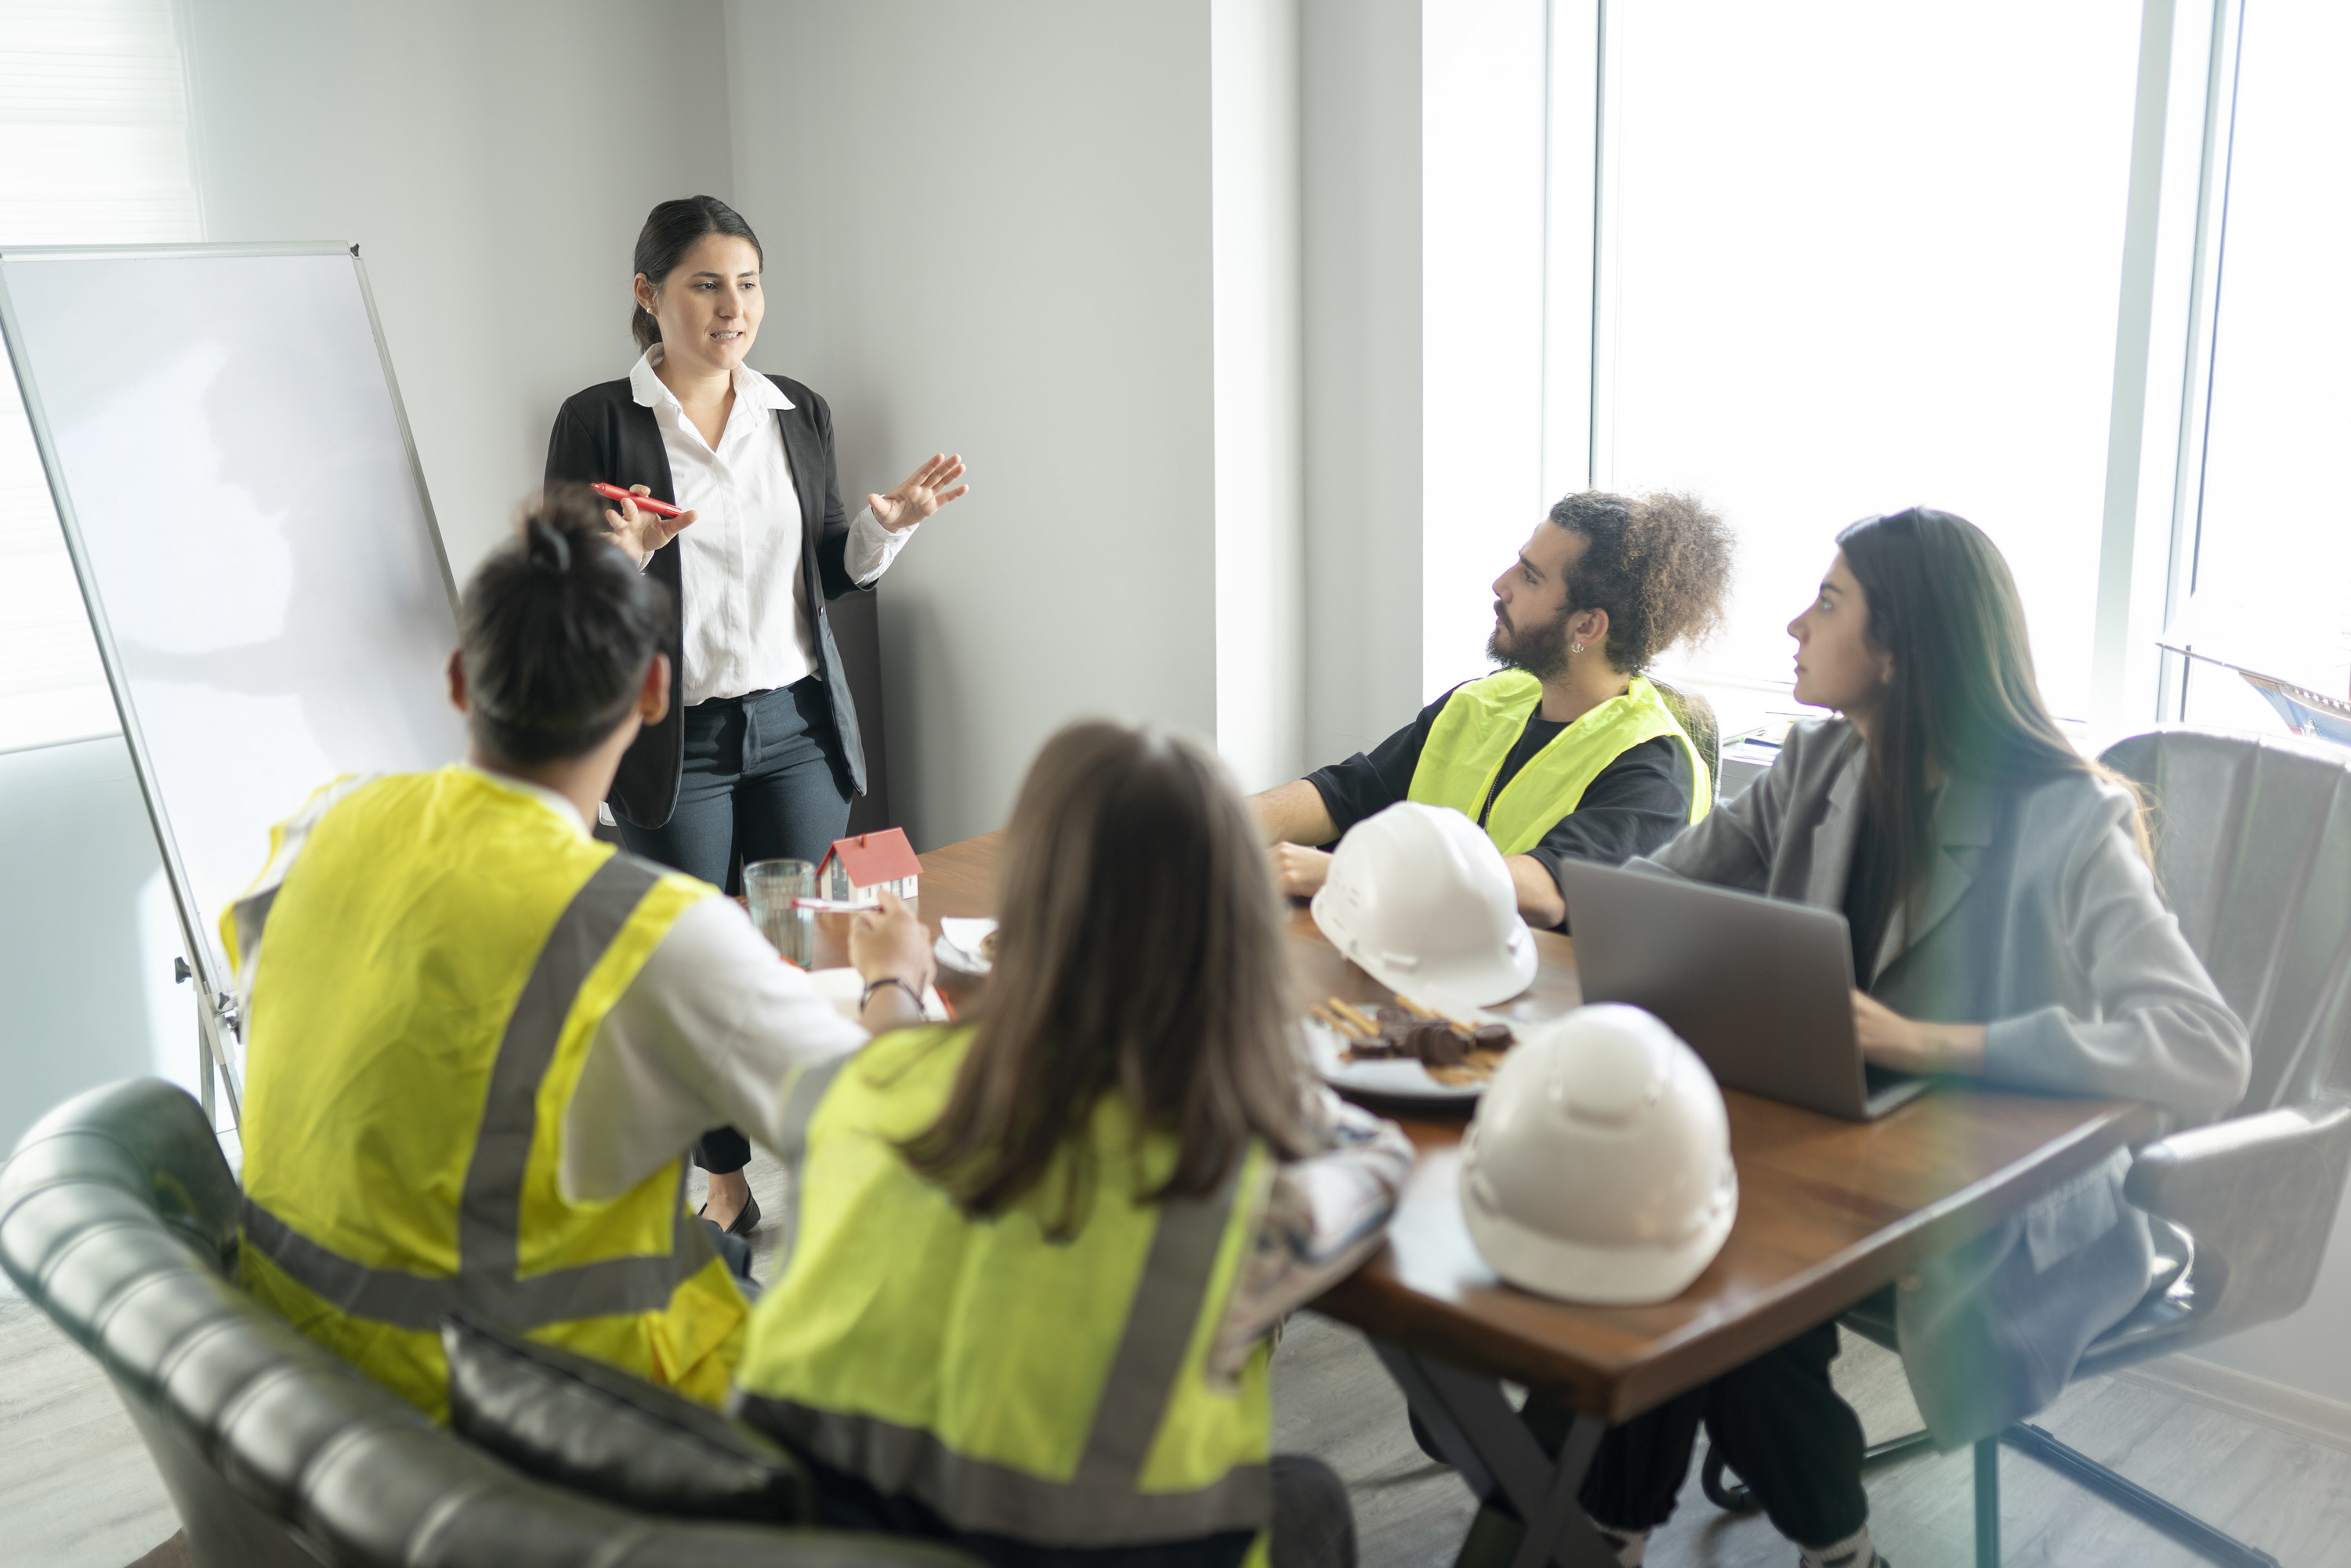 Woman in a blazer giving a presentation to a room of construction workers, some wearing yellow reflective jackets, with hard hats on the table